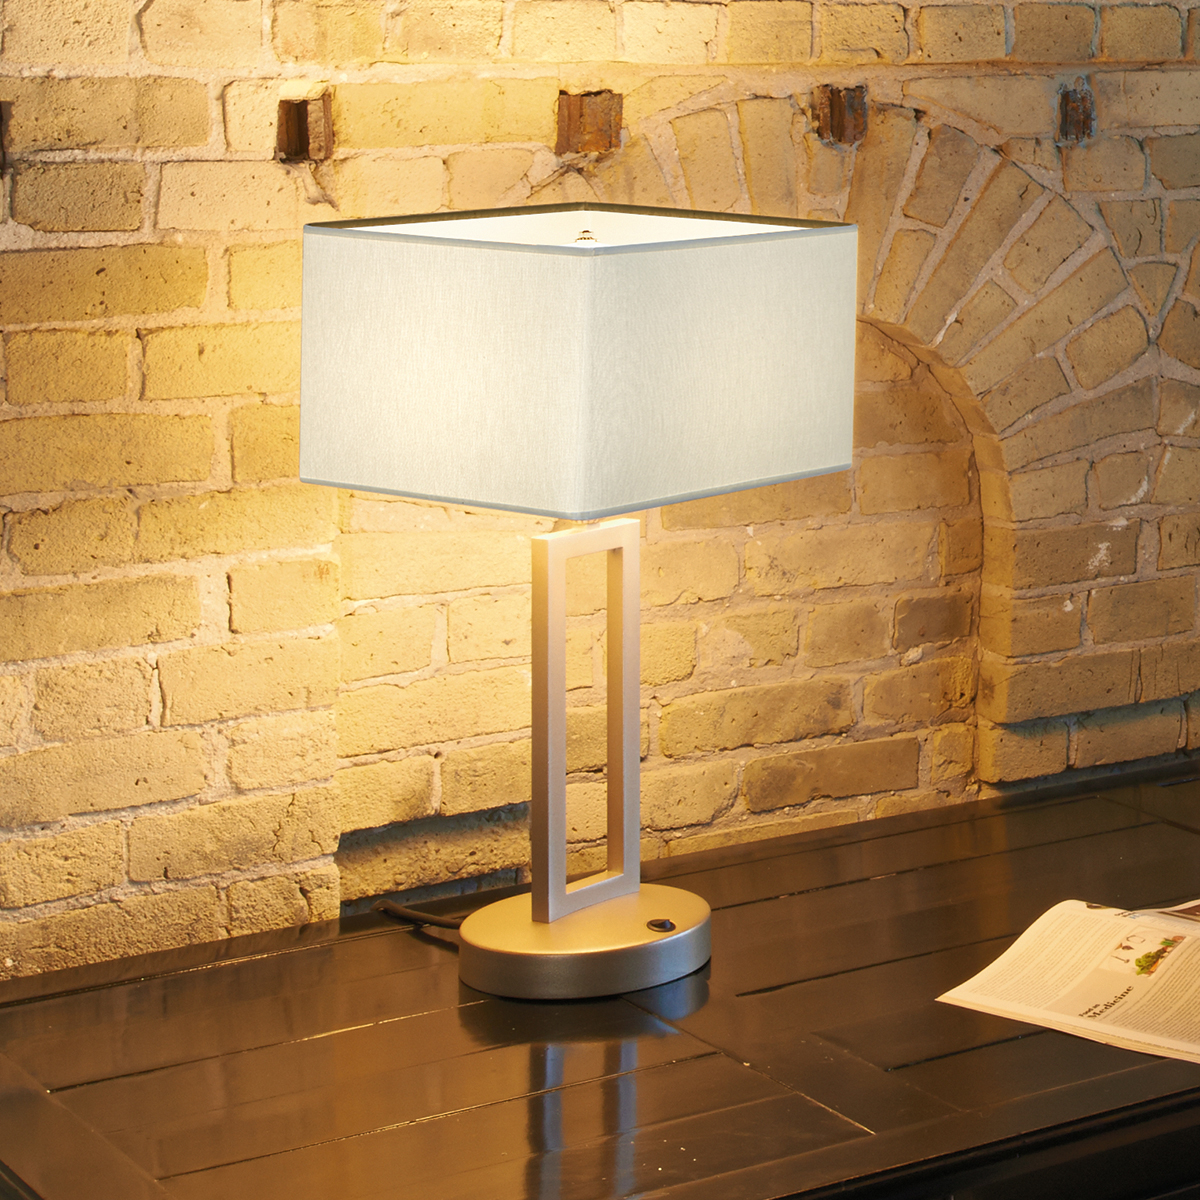 A table lamp with a fabric-looking shade